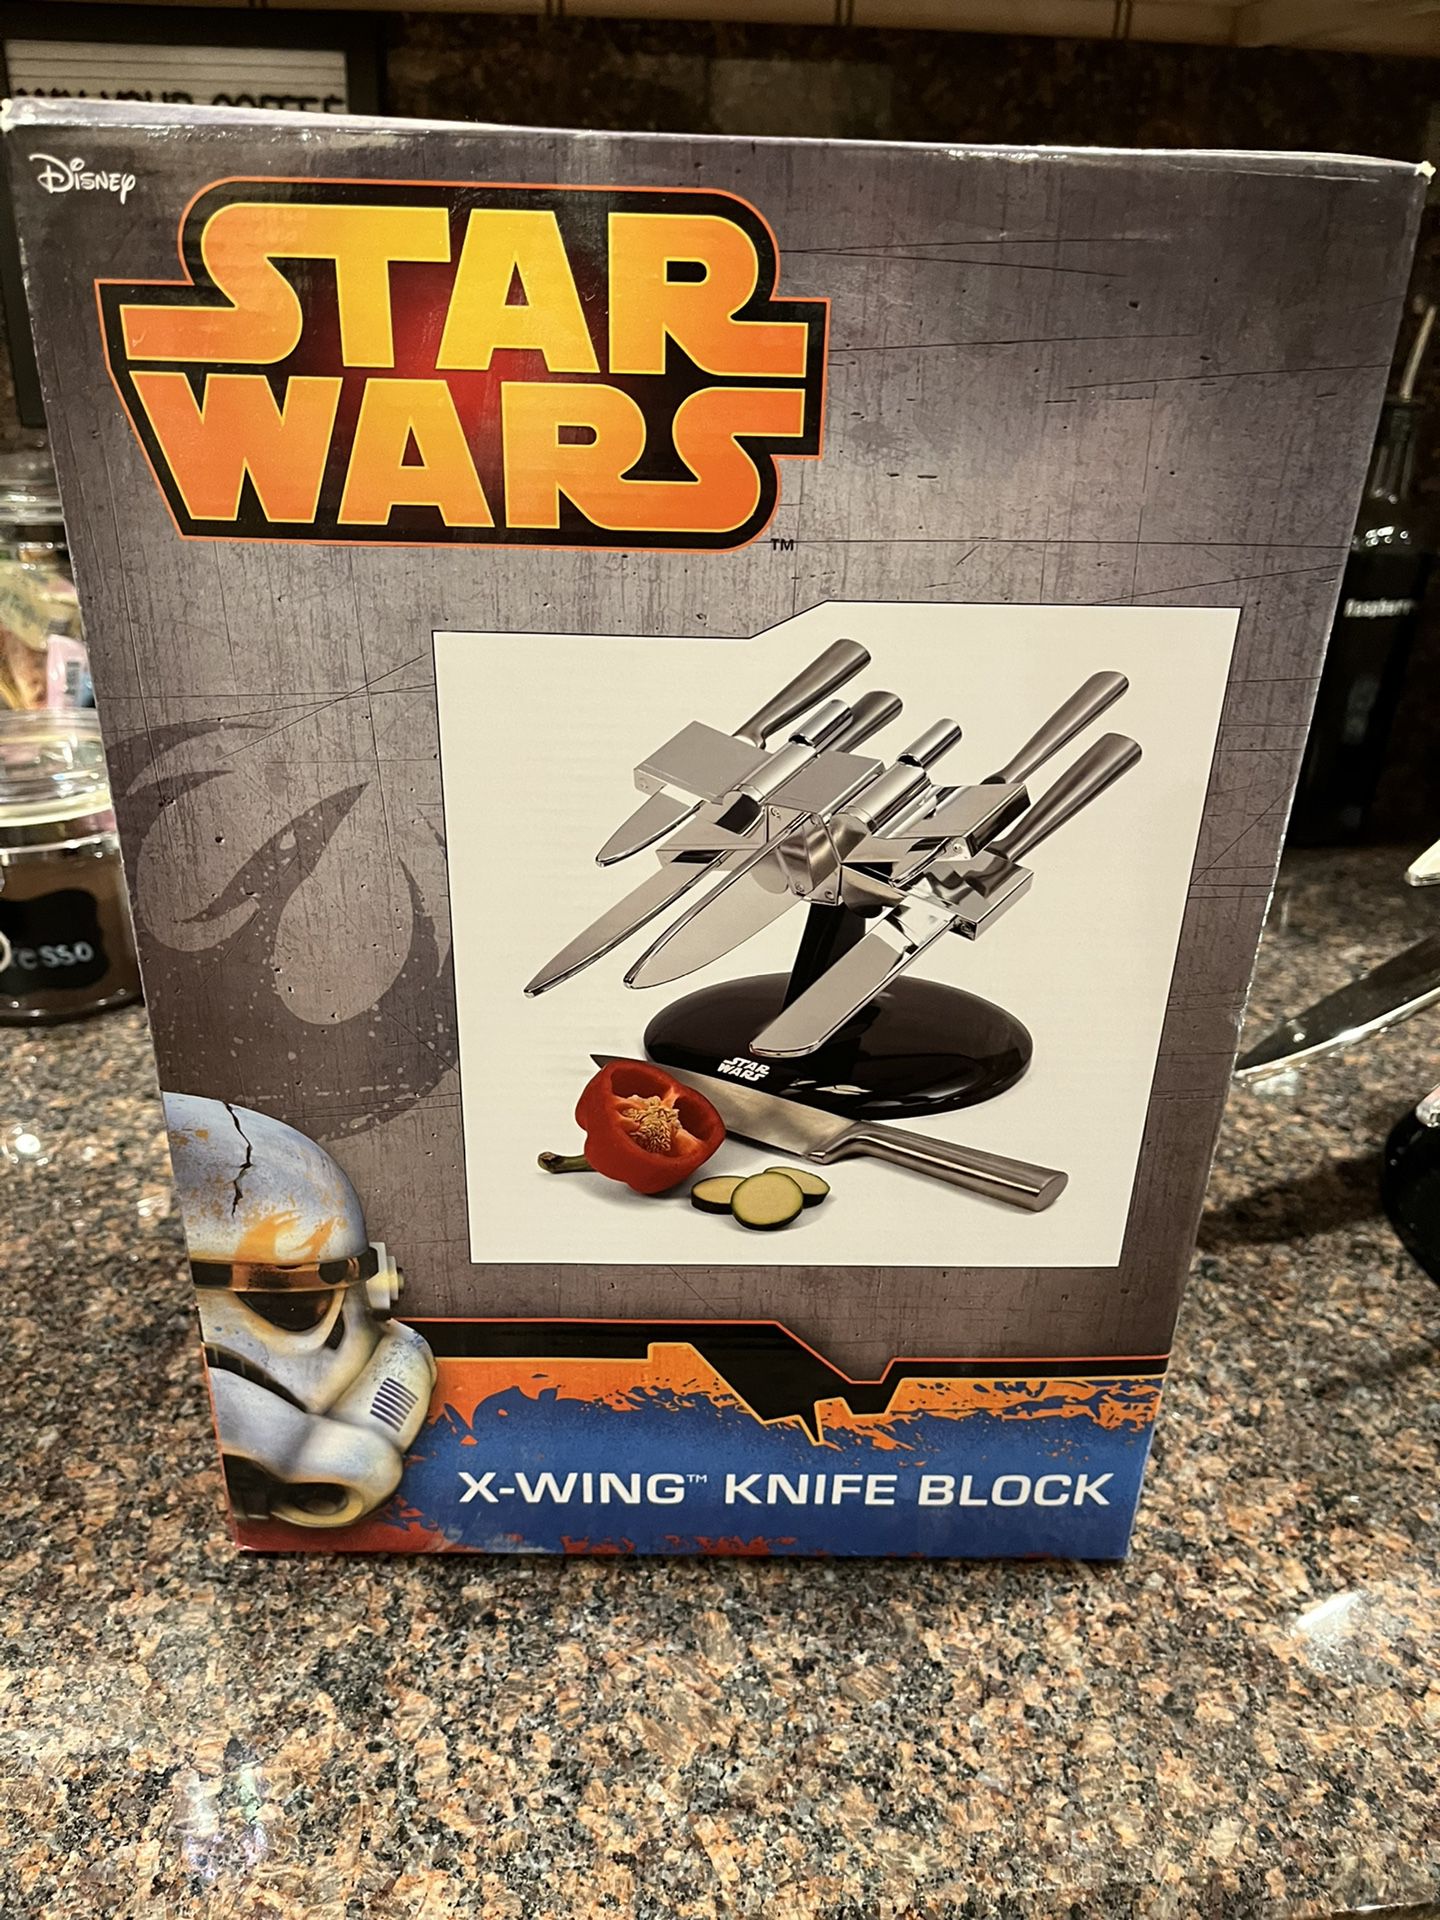 Star Wars X-Wing Kitchen Knife Set for Sale in Huntington, NY - OfferUp